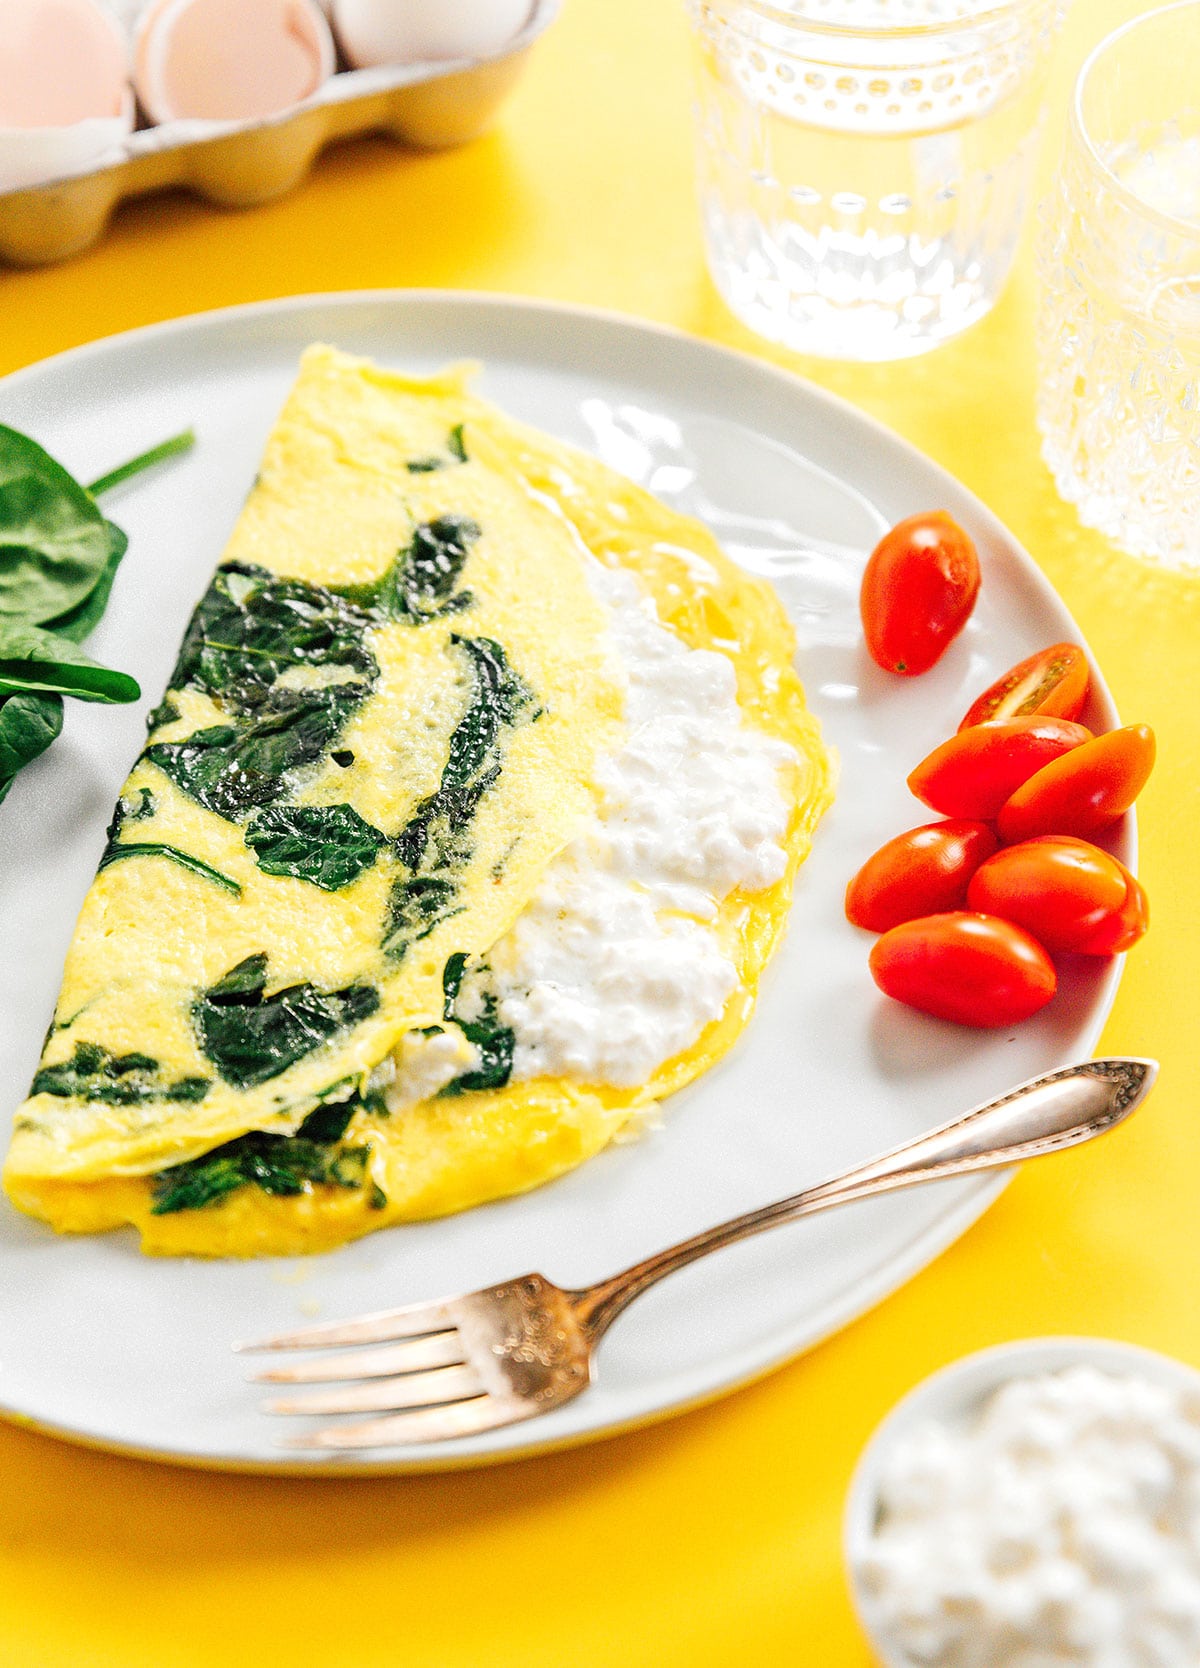 A cottage cheese and spinach omelette on a plate with cherry tomatoes.